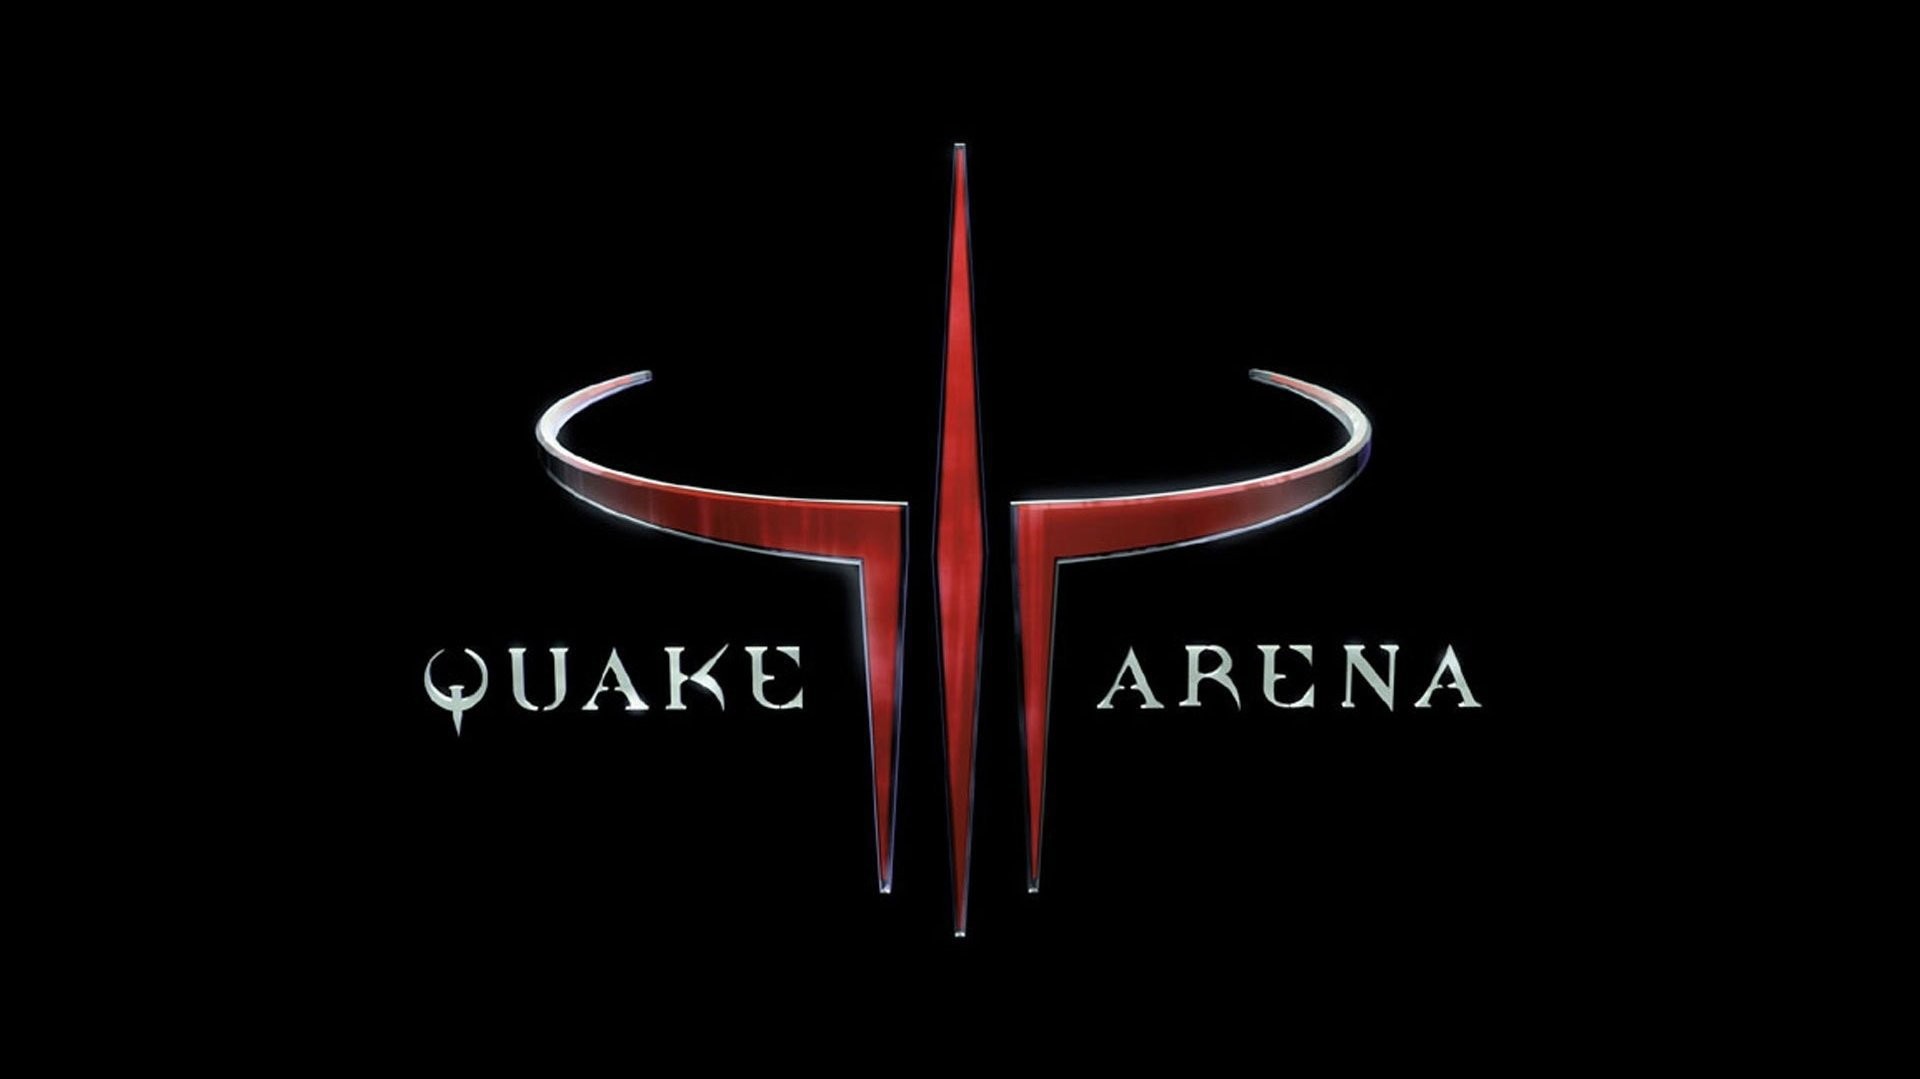 General 1920x1079 Quake video games first-person shooter black red black background simple background PC gaming